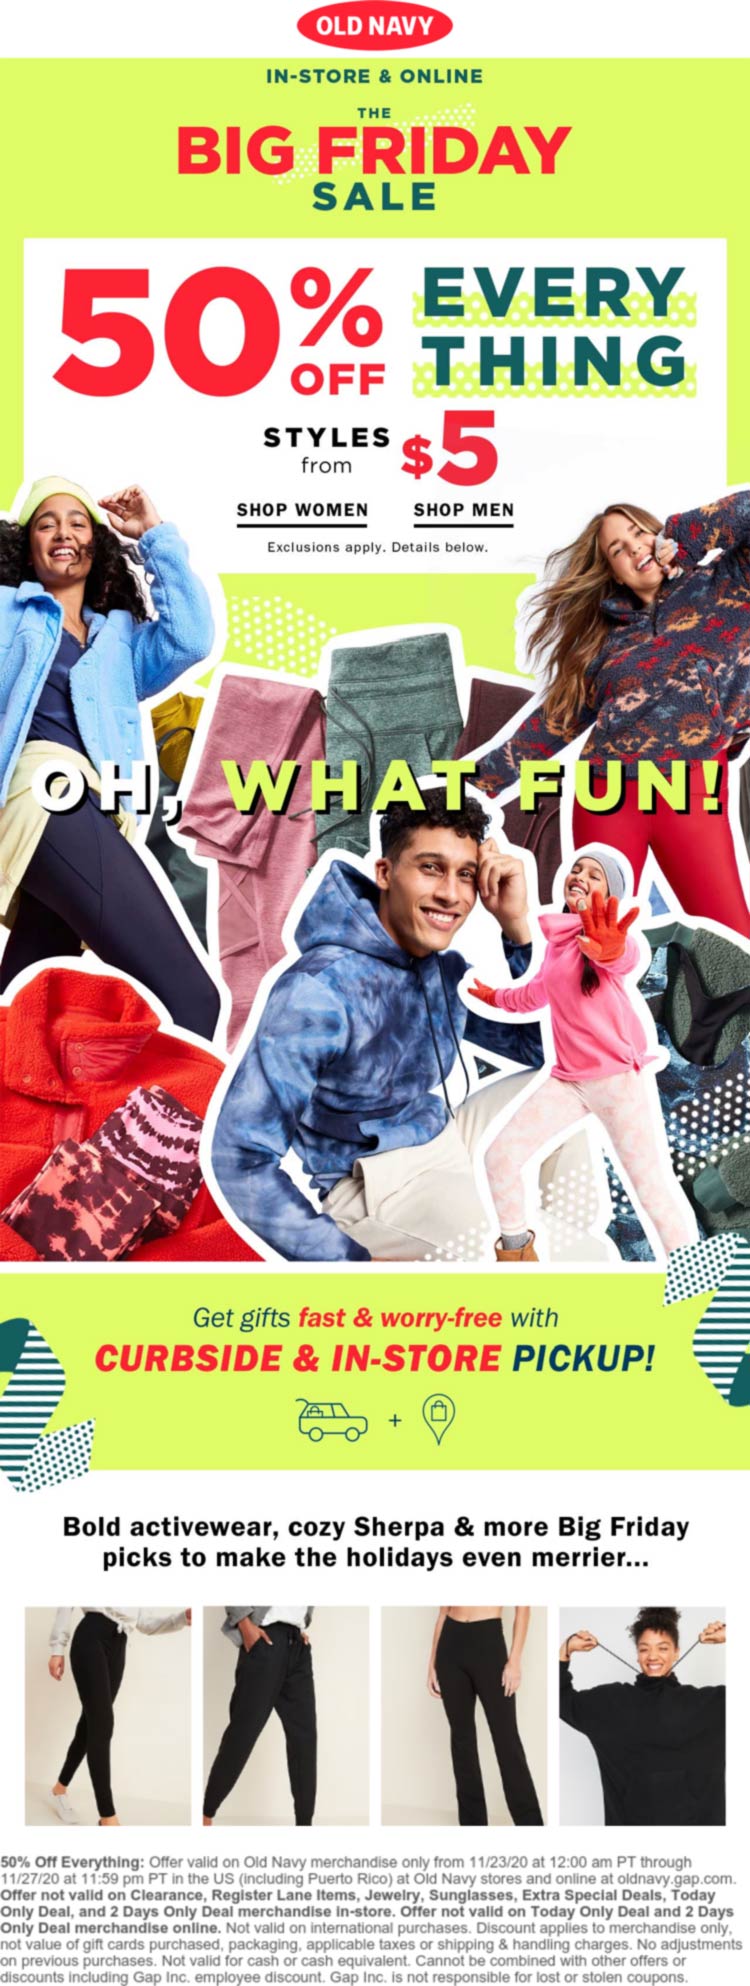 Old Navy stores Coupon  50% off everything + $1 cozy socks at Old Navy, ditto online #oldnavy 